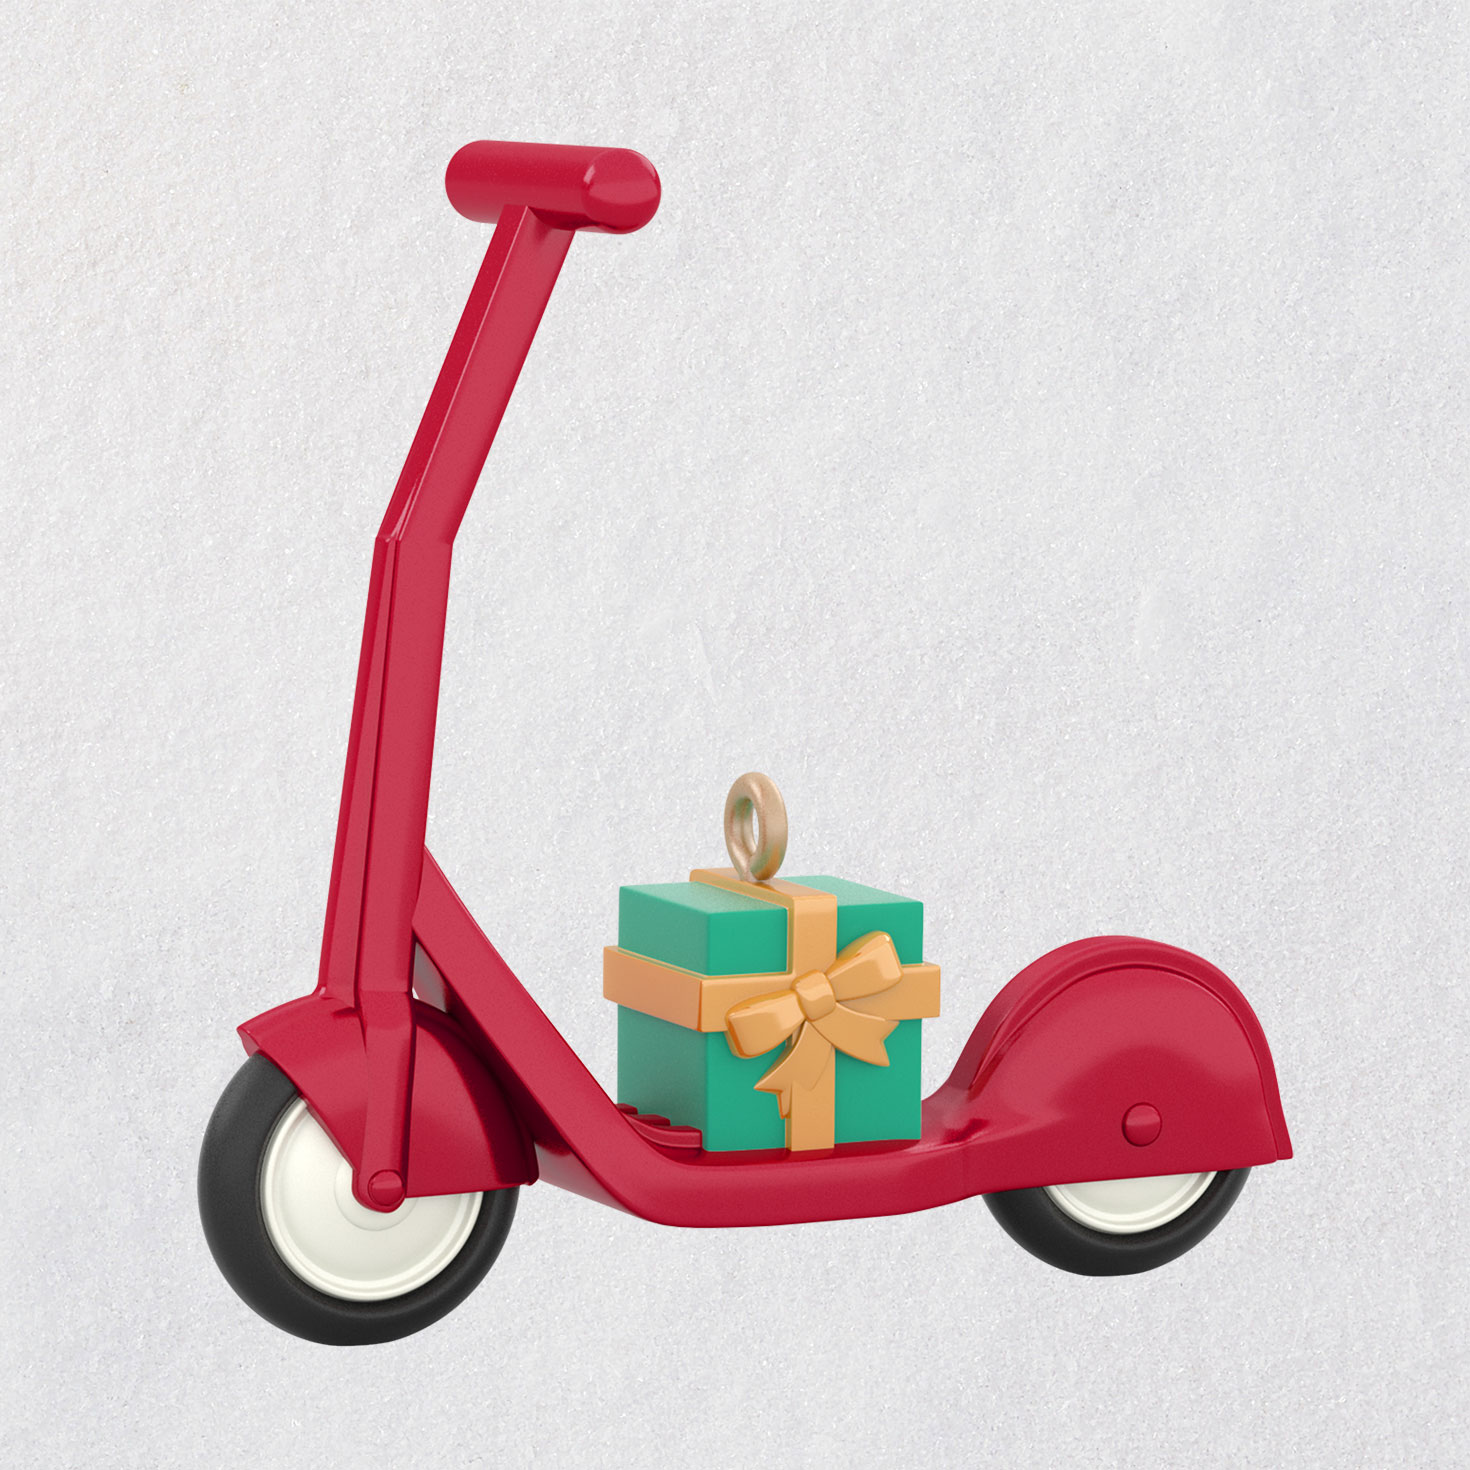 Small scooter miniature ornament 2020 - Occasions Hallmark Gifts and More